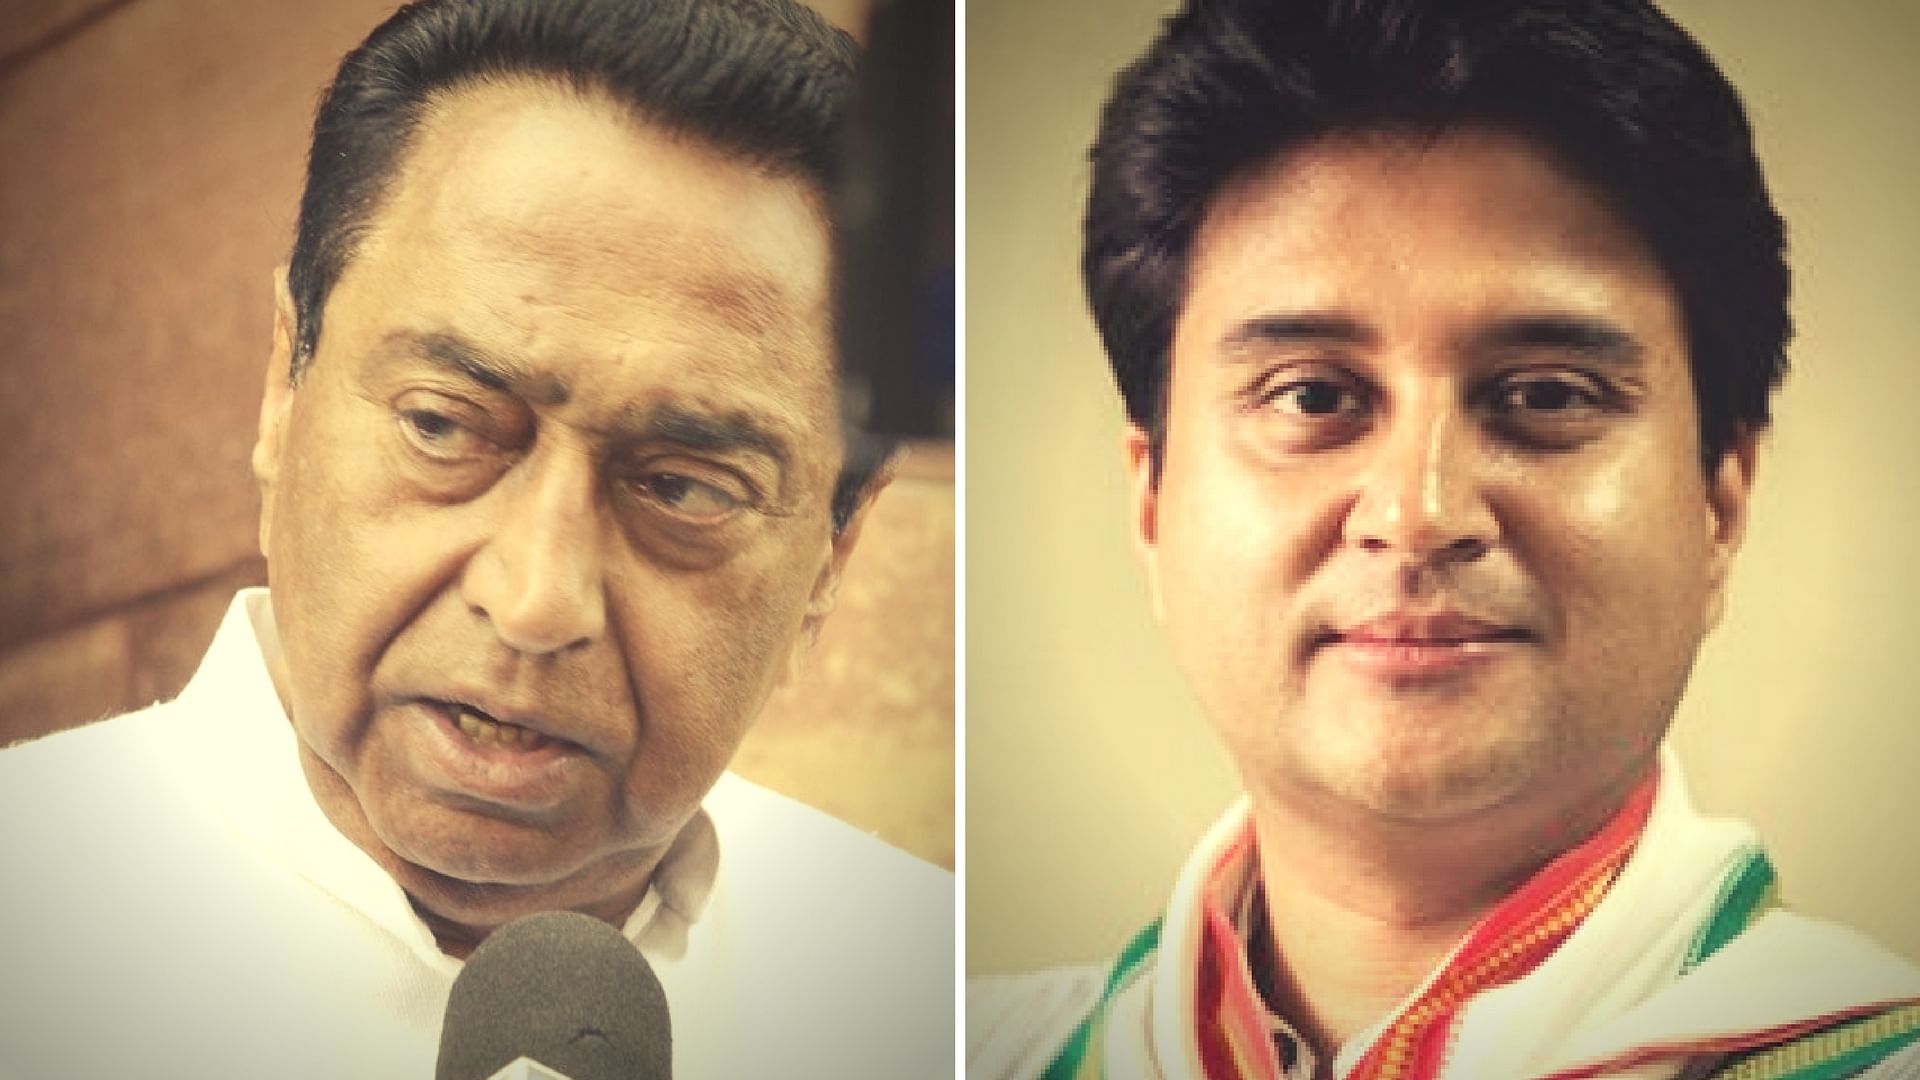 The chief ministerial candidate has not yet been decided as the choice still seems open with both Kamal Nath and Scindia in the race, a party leader said.